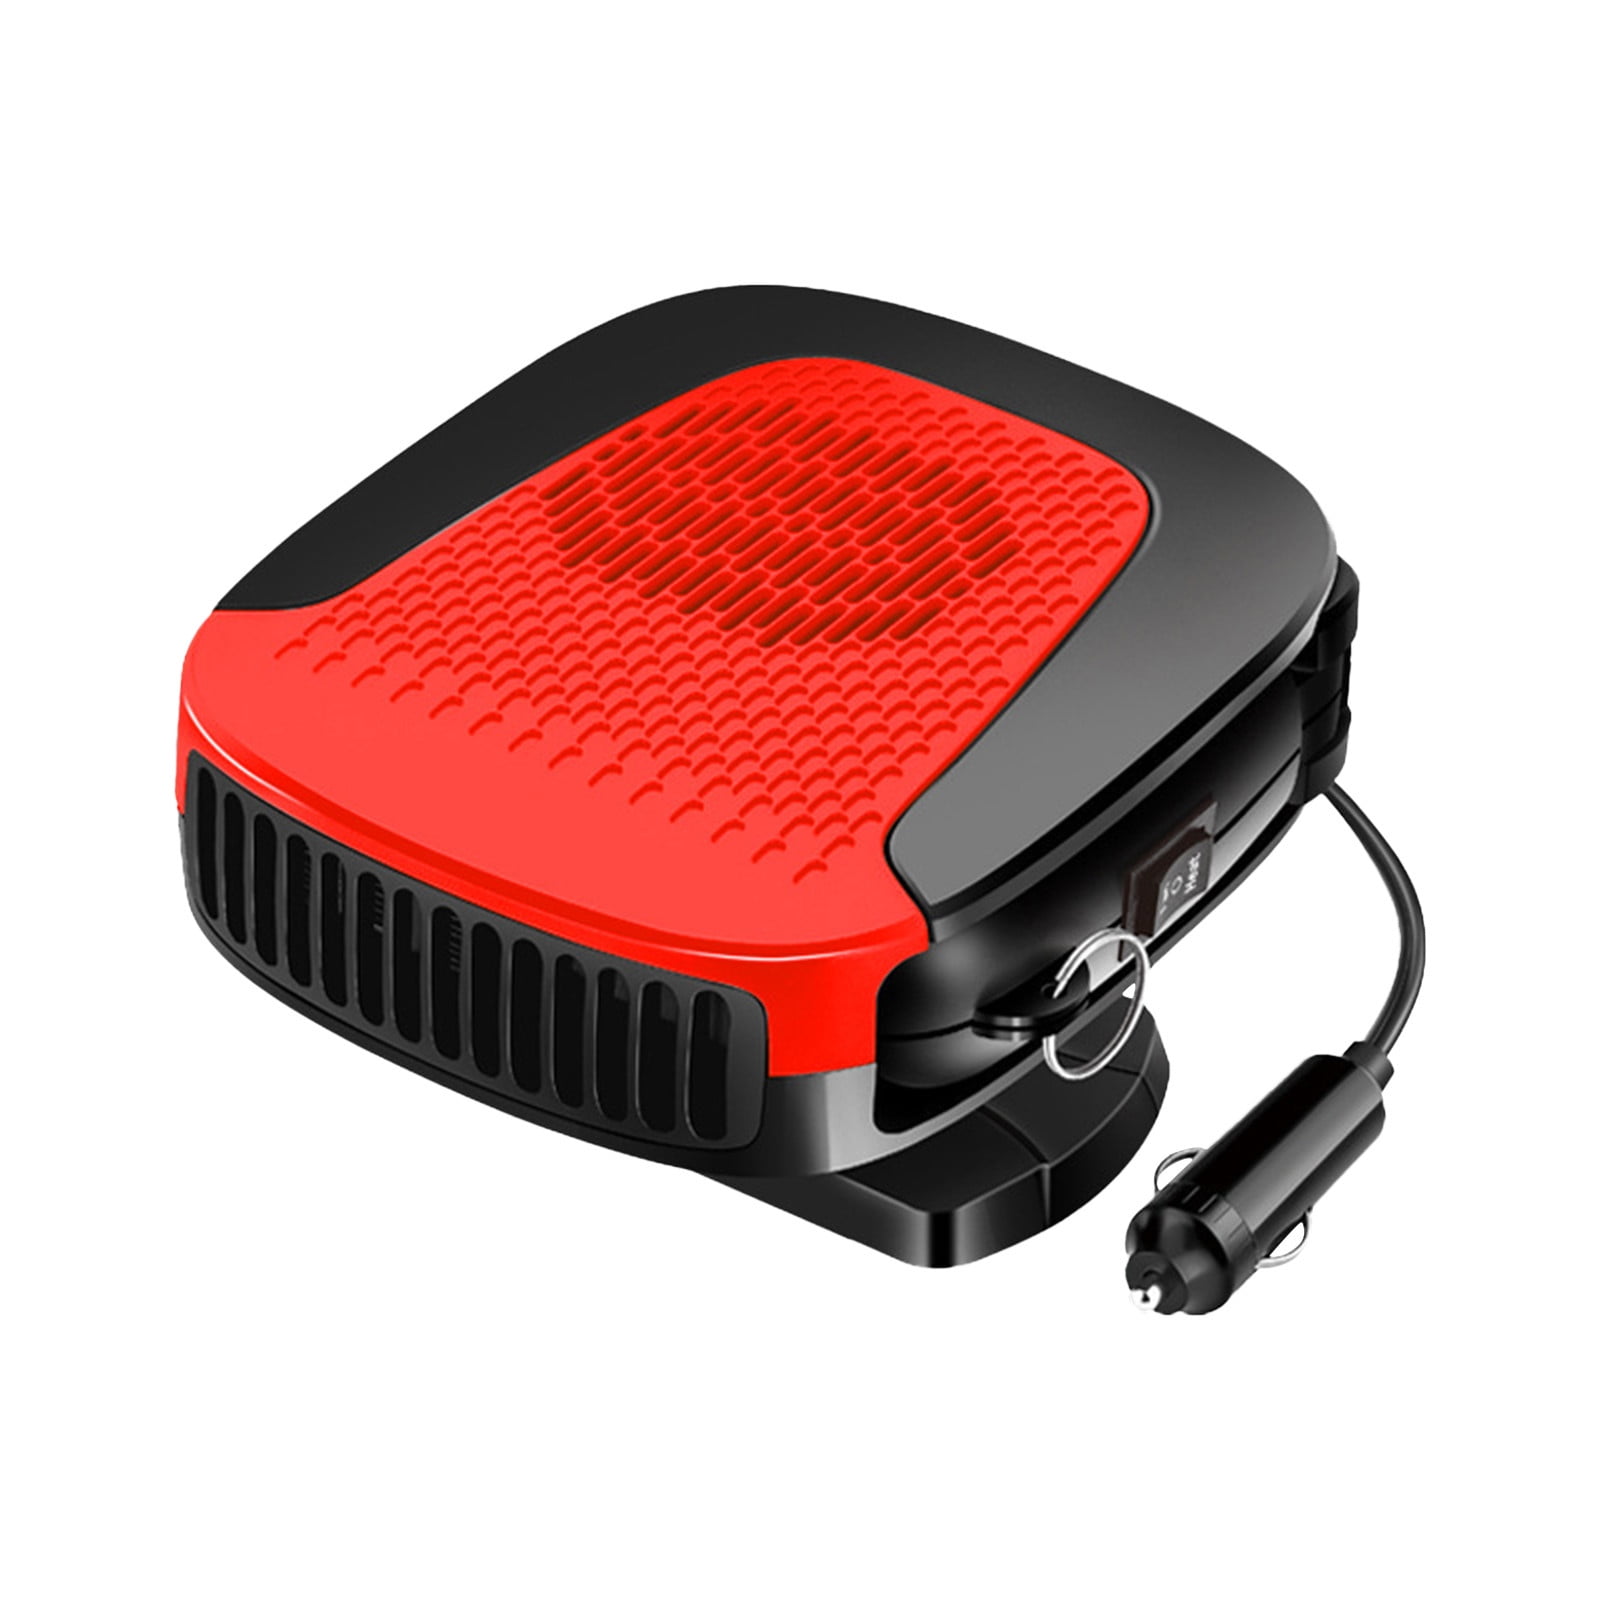 Car Heater, Car Heater That Plugs into Cigarette Lighter,Portable car Heater,Portable  Car Heater and Defroster,360 Degree Rotary Base 